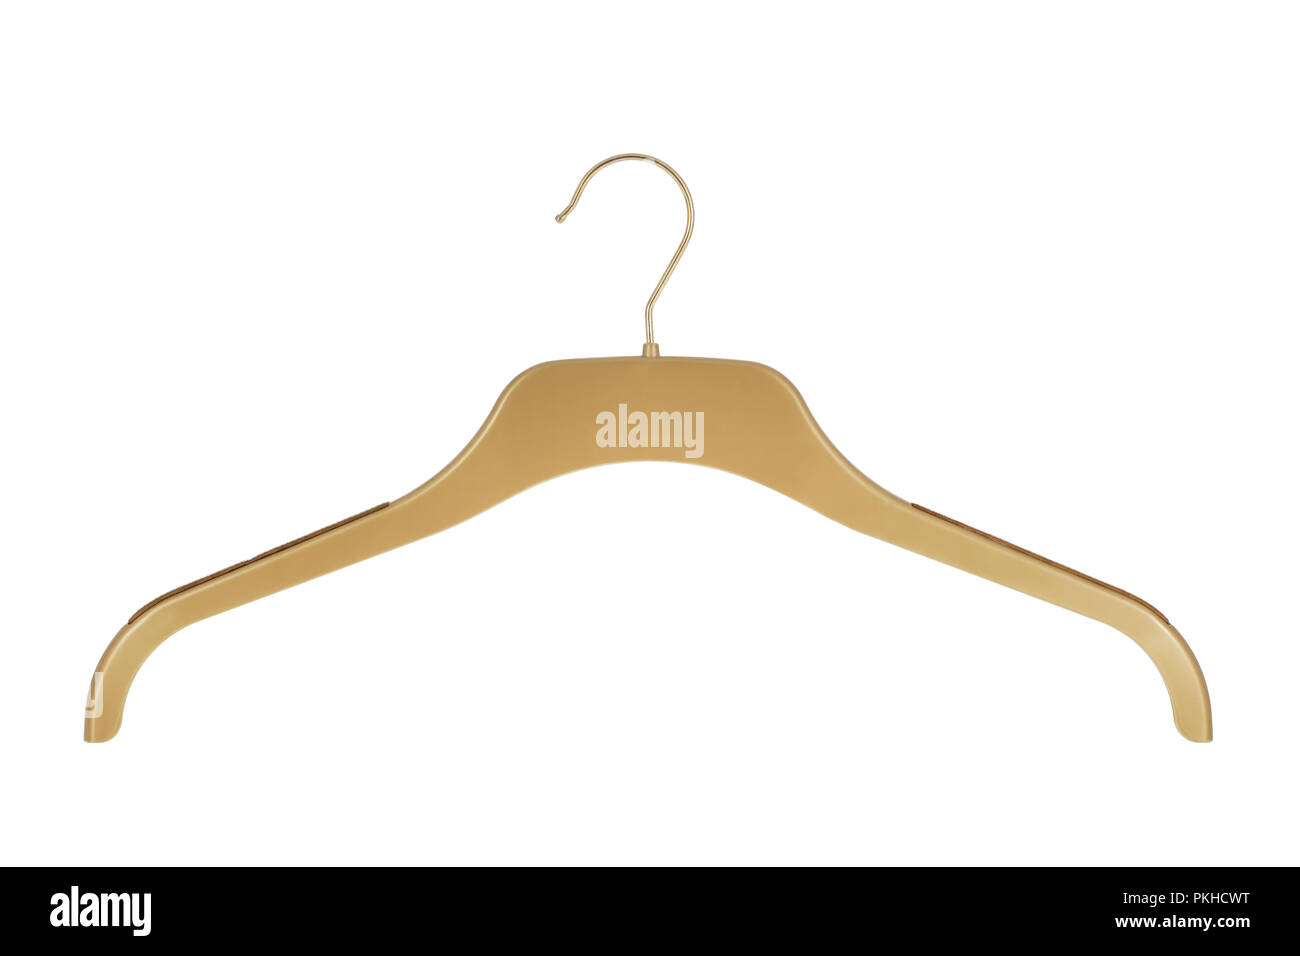 Gold colored clothes hanger isolated on a white background Stock Photo